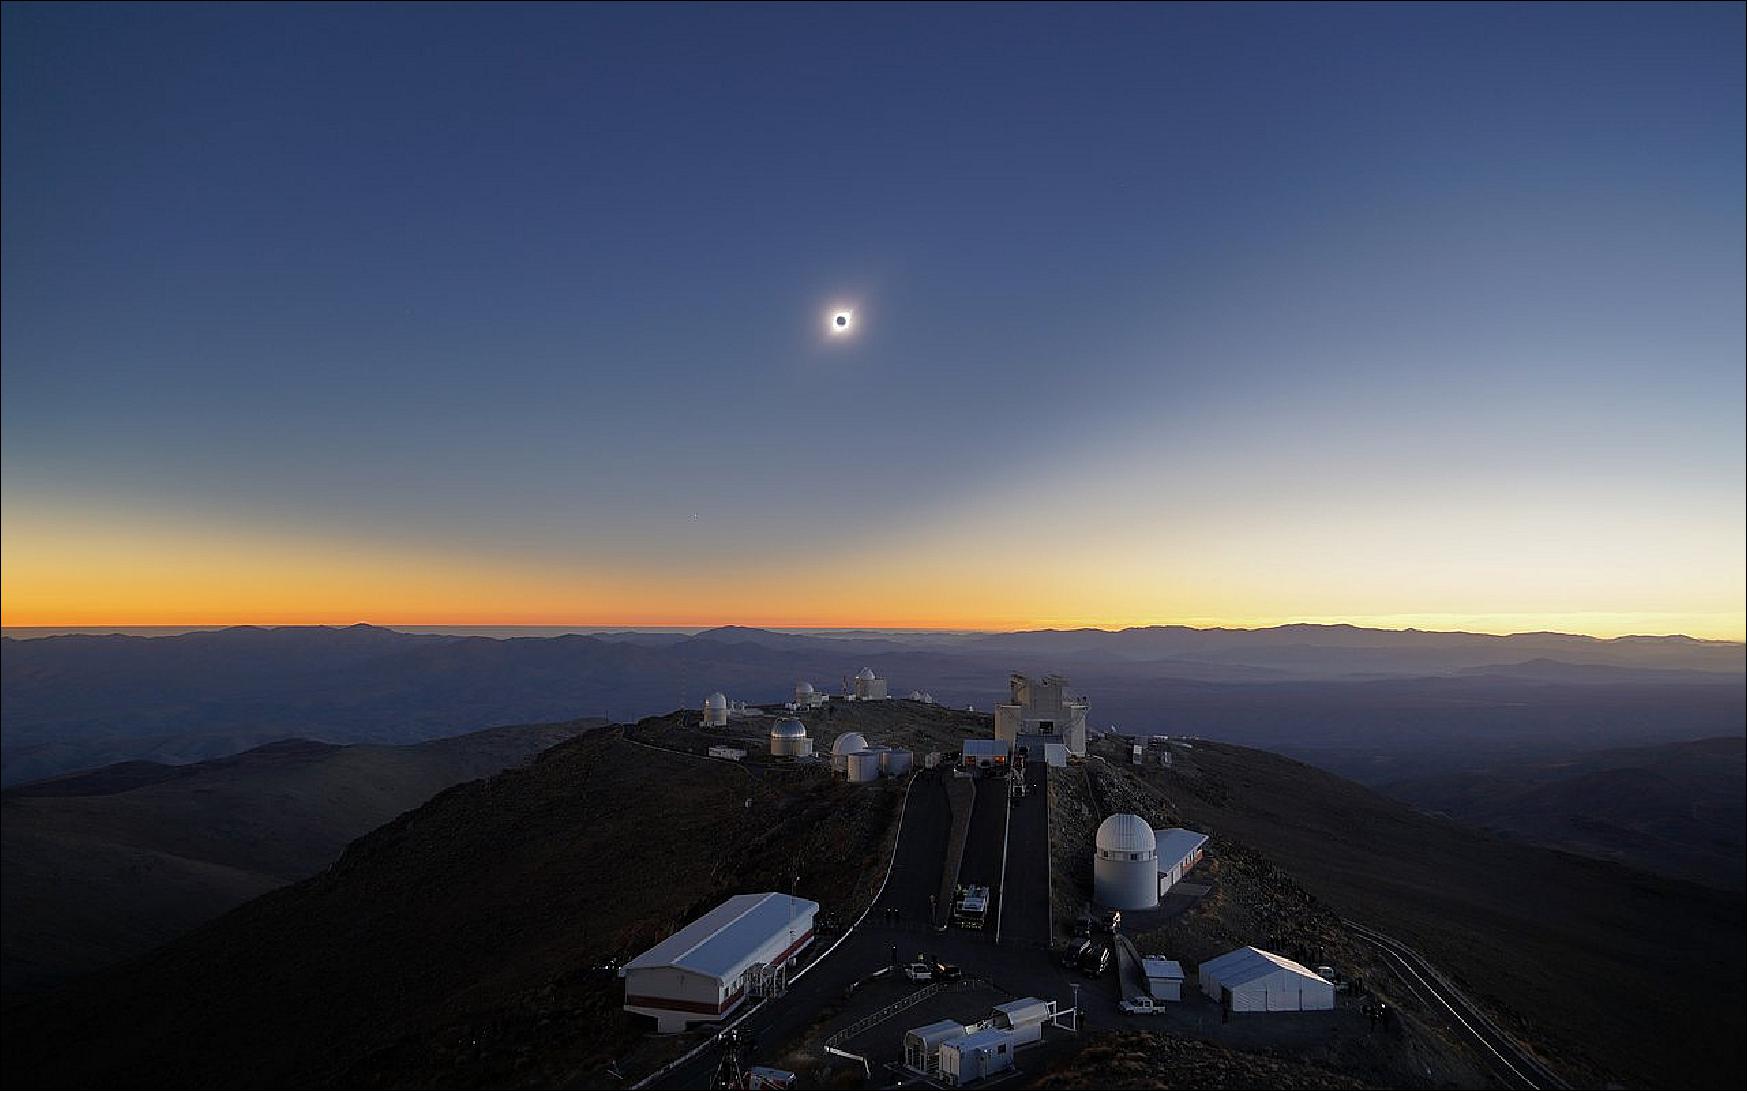 Figure 14: On 2 July 2019, the path of totality of a solar eclipse passed across ESO’s La Silla Observatory. This rare astronomical event falls in the fiftieth year of operation of ESO’s first observatory. Inaugurated in 1969, La Silla Observatory led Europe to the front line of astronomical research and continues to deliver remarkable science. A thousand visitors, including the President of the Republic of Chile, journeyed to the remote observatory to witness the unique conjunction (image credit: ESO)